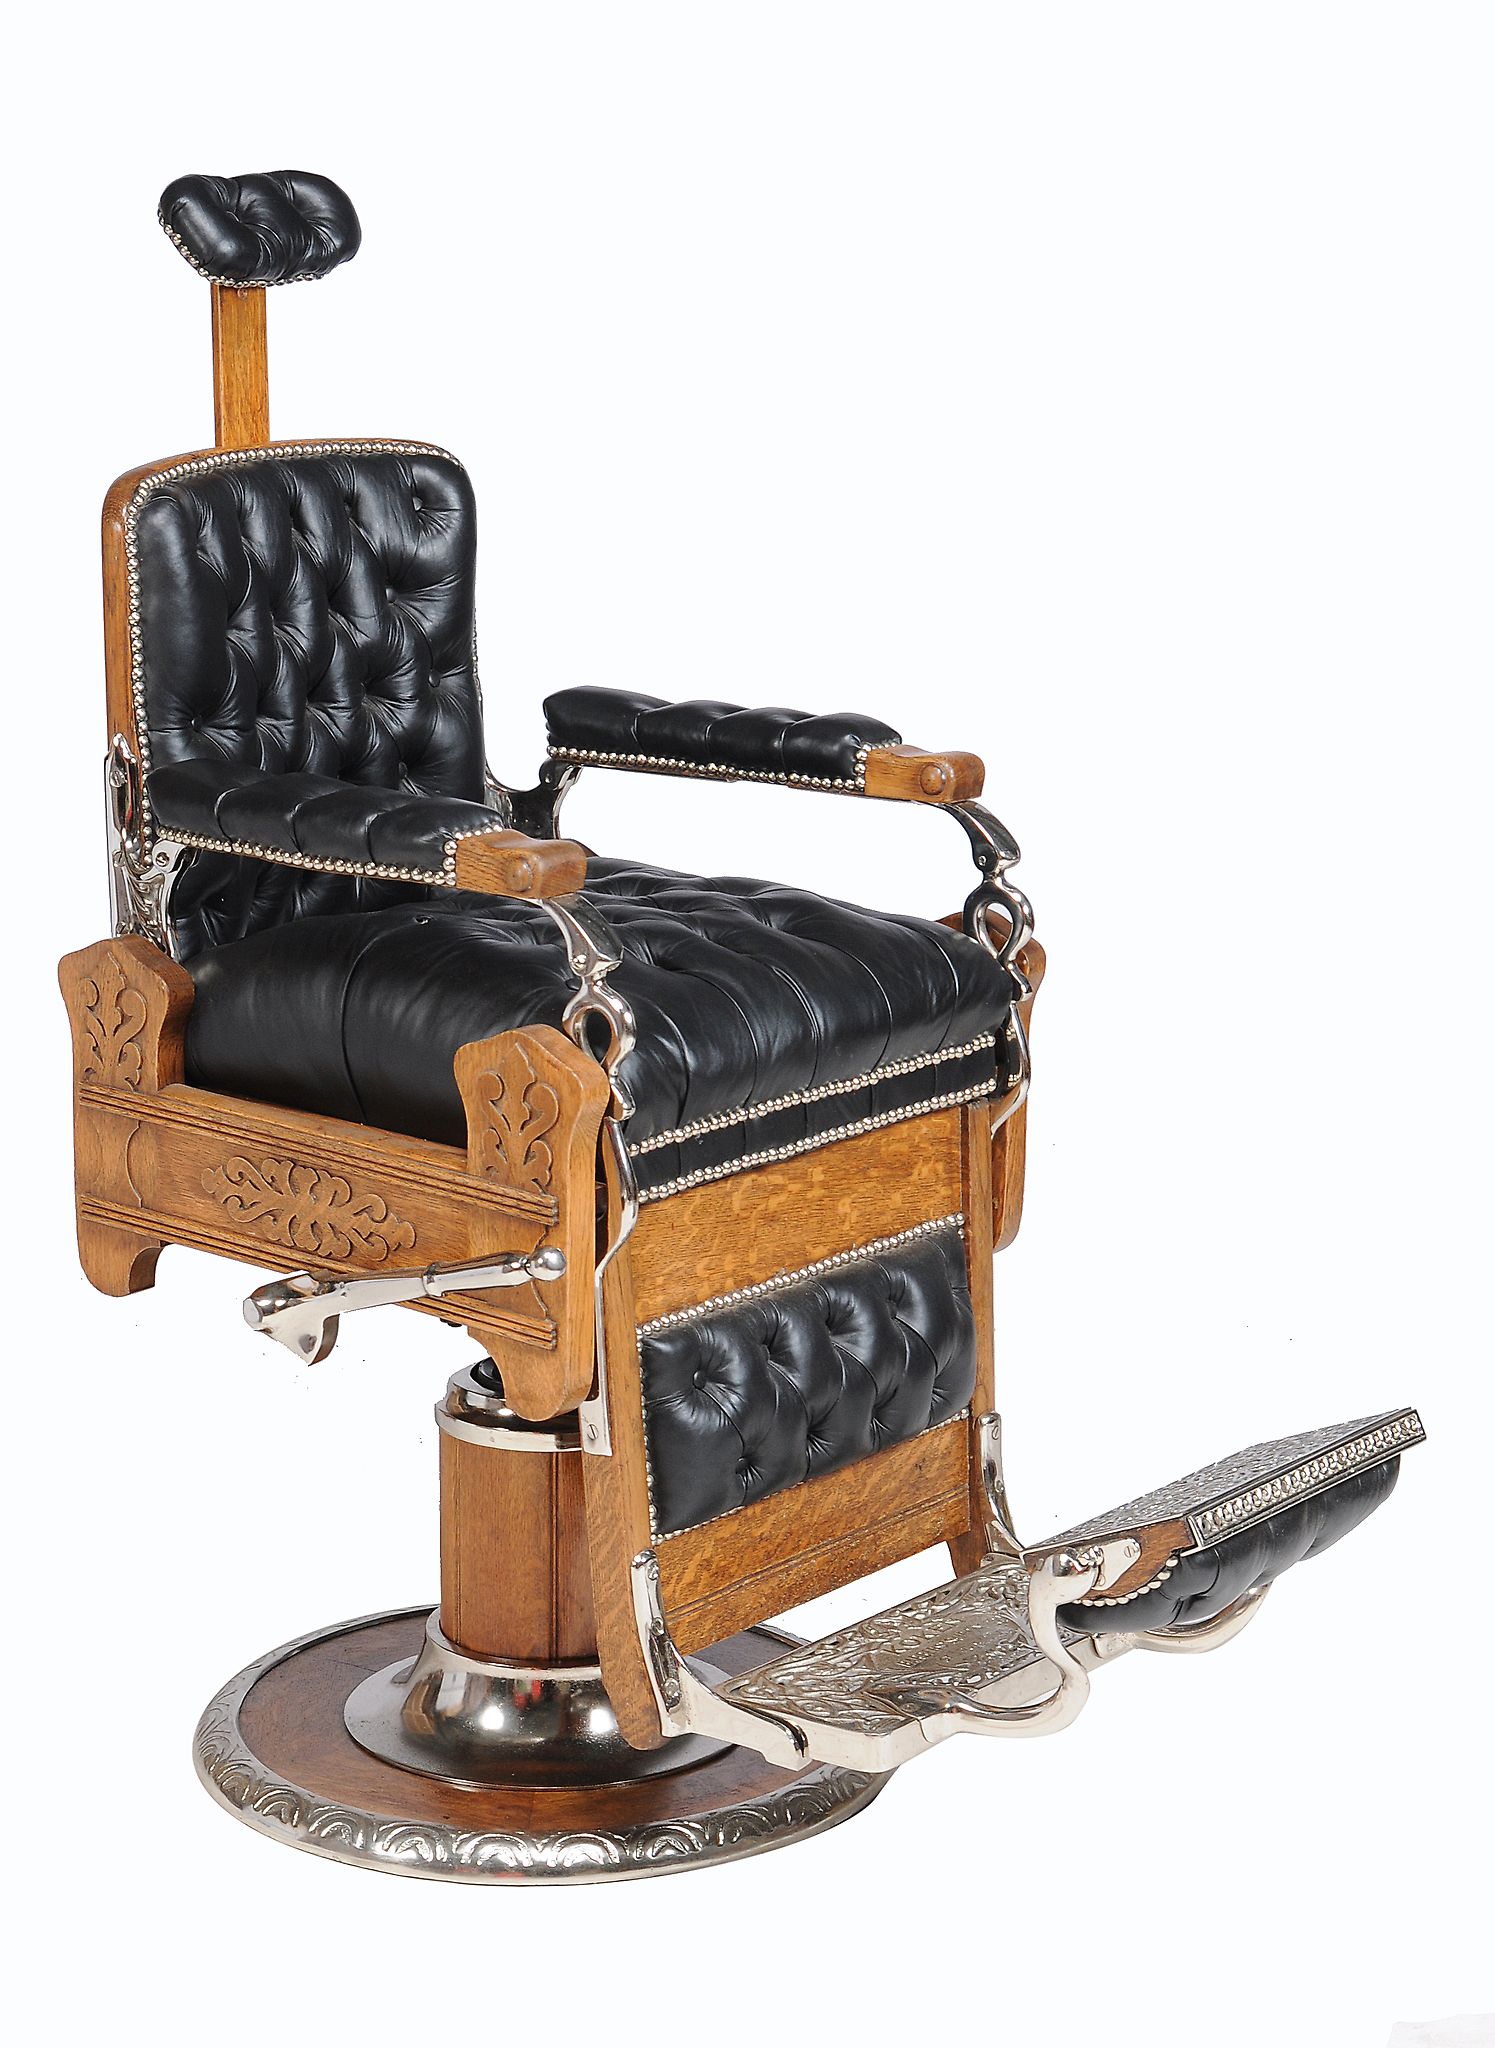 An oak, chromed metal and leather upholstered barber's chair, Koken, early 20th century and later